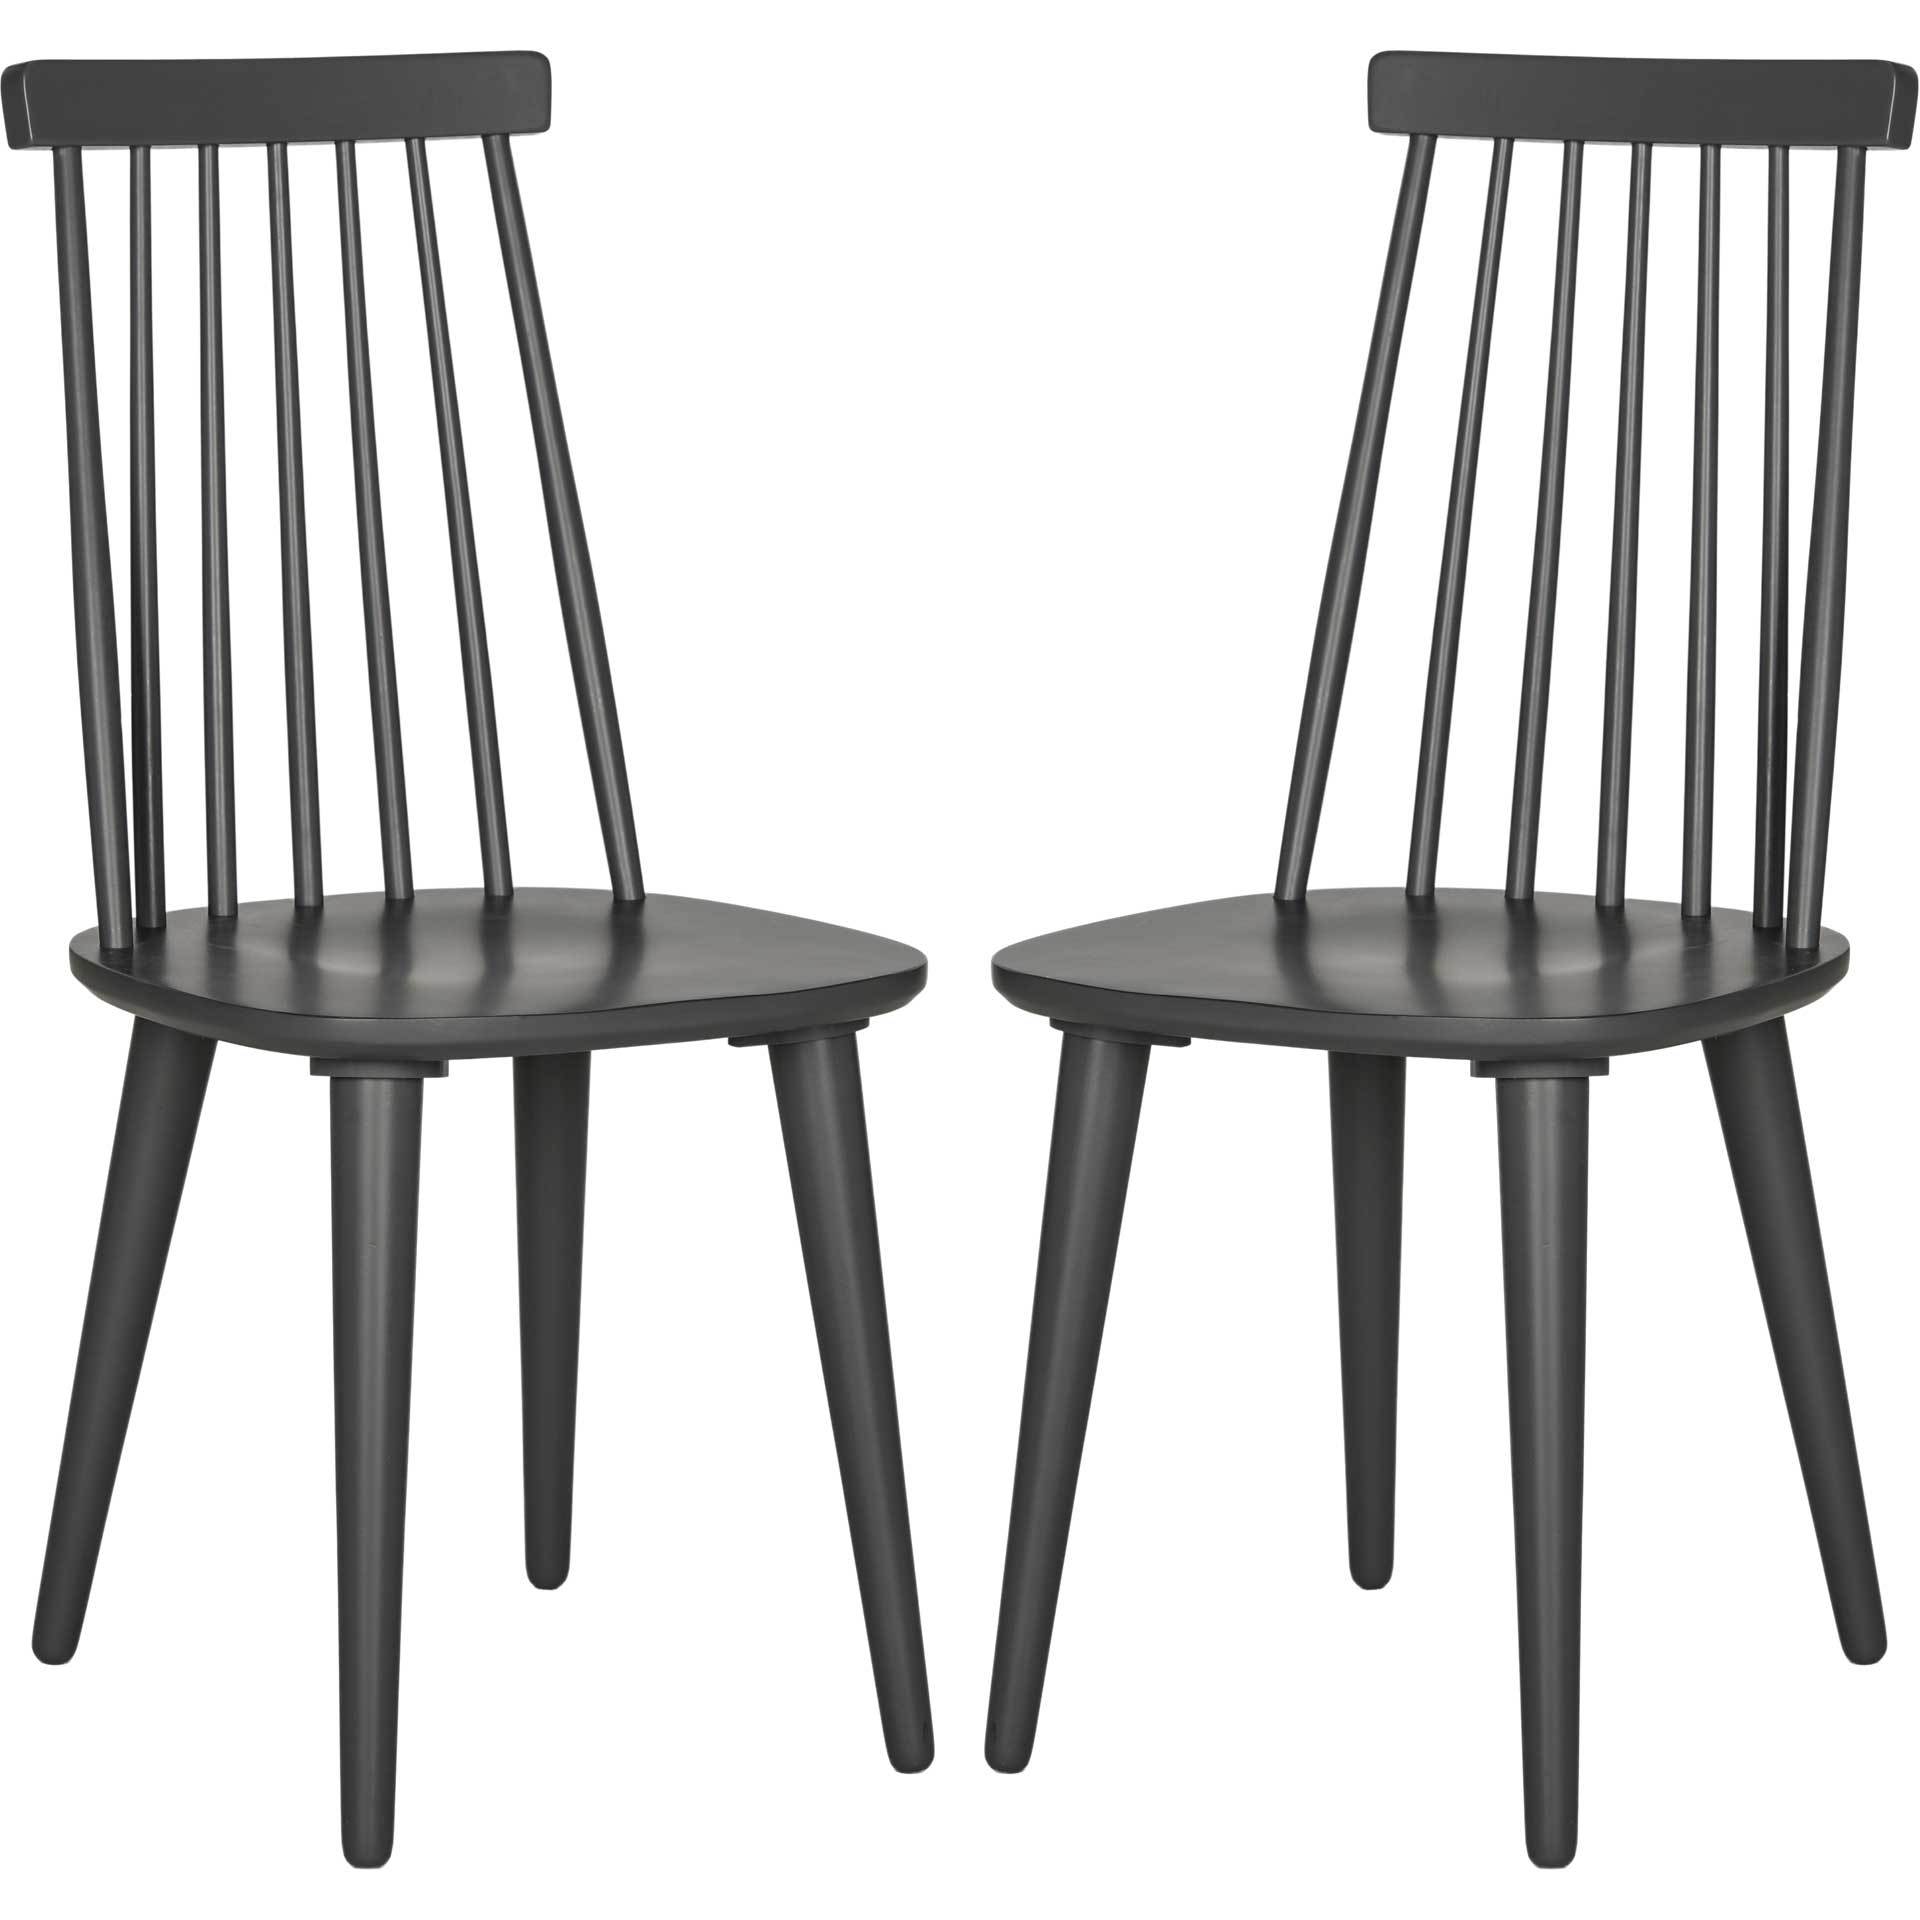 Buckley Spindle Side Chair Gray (Set of 2)